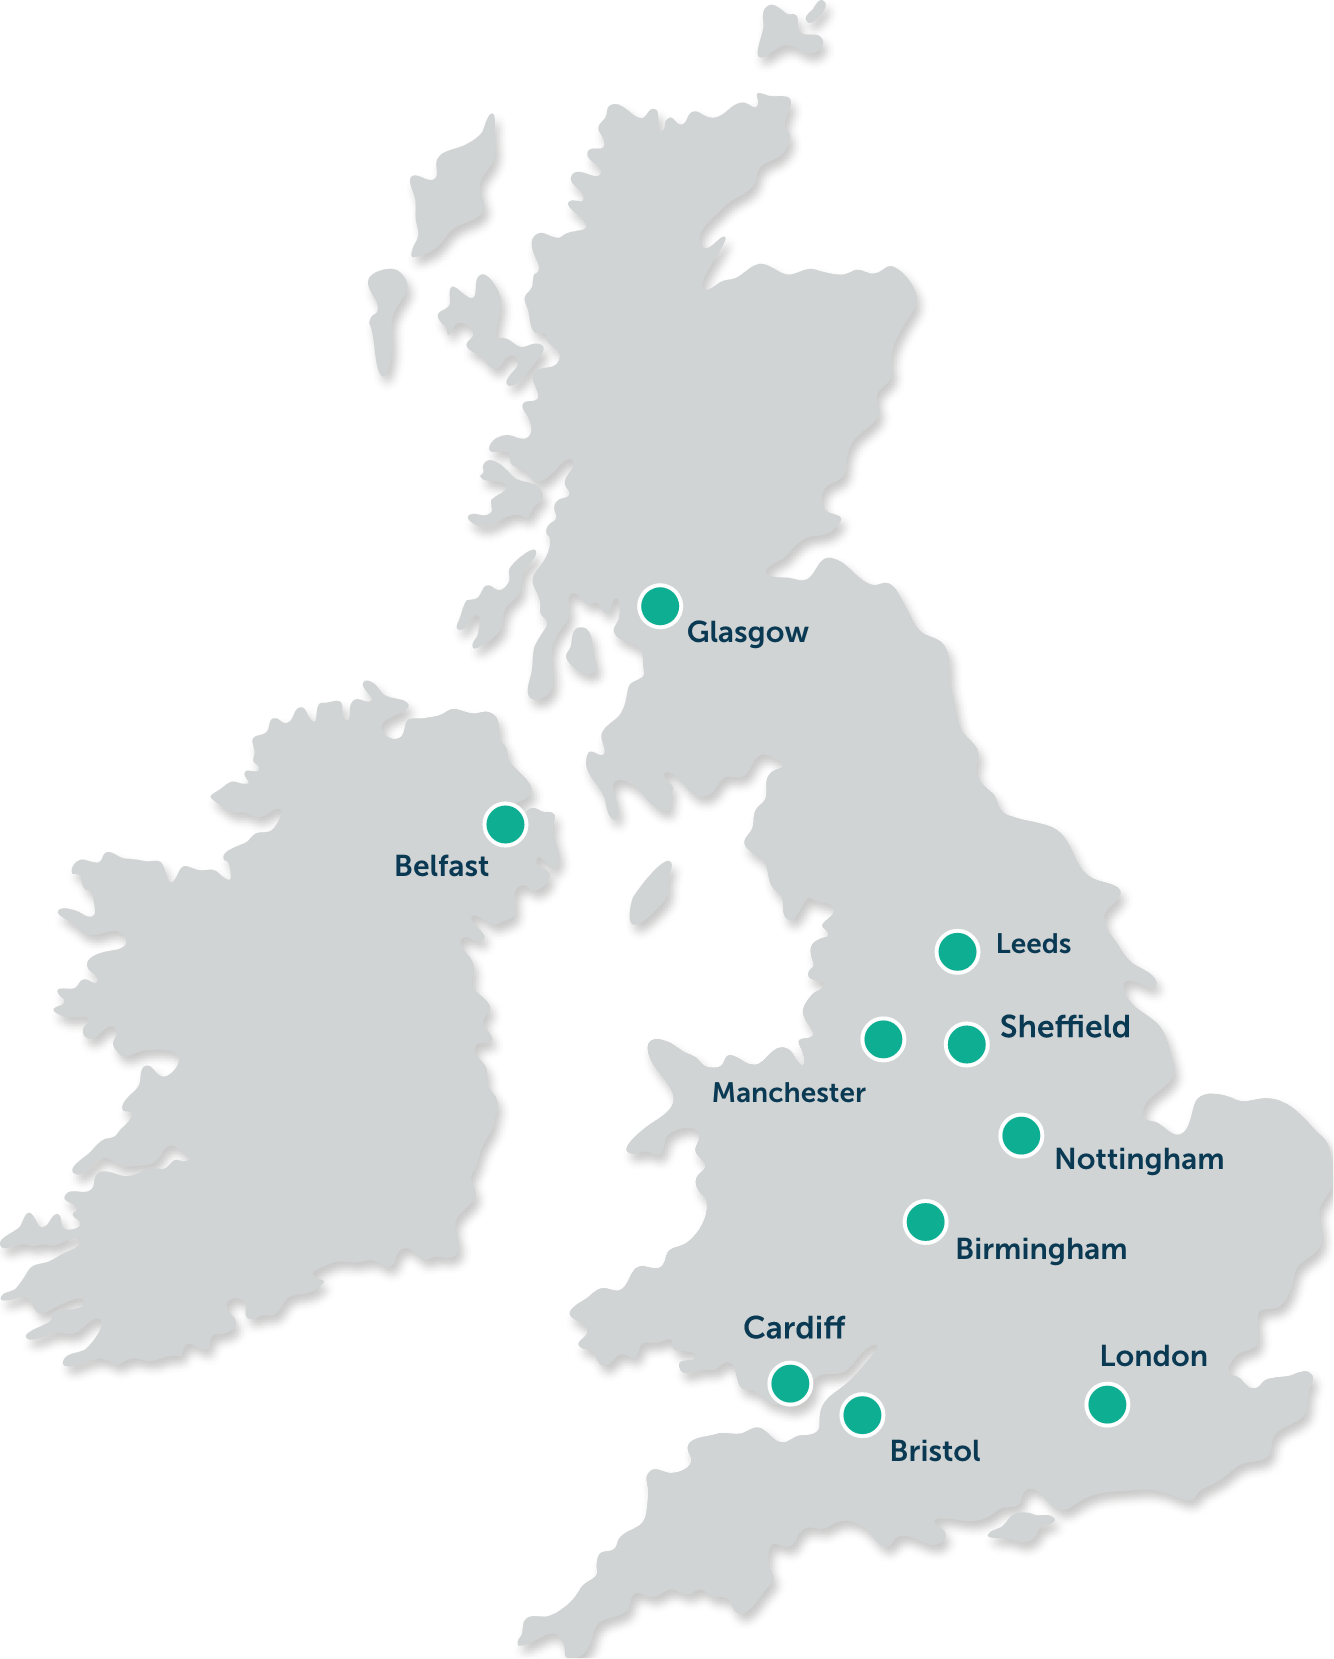 Map of the UK with SJP locations